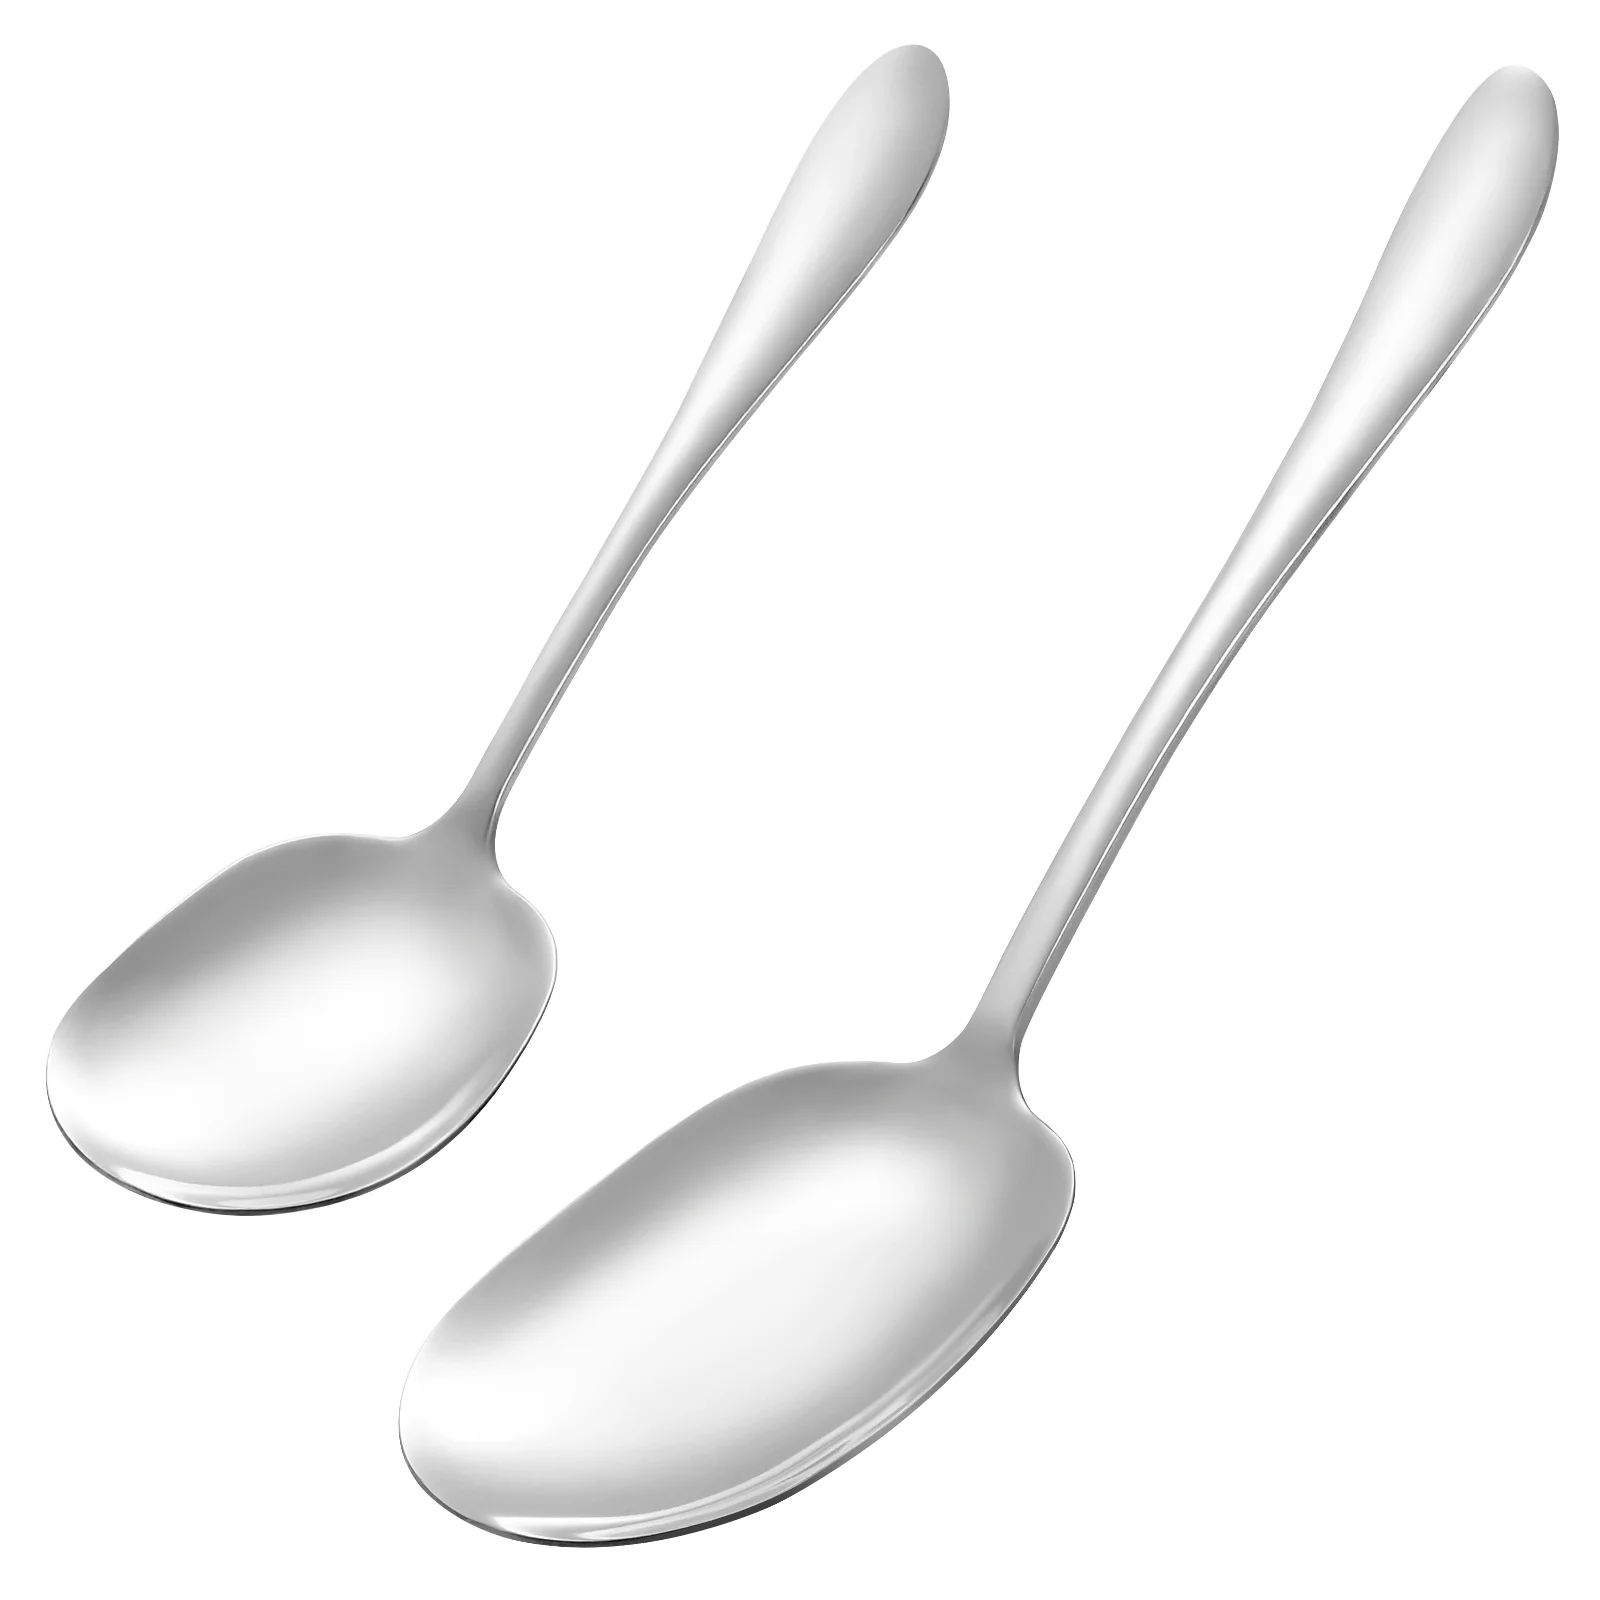 

Rice Spoon Metal Kitchen Supplies Stainless Steel Spoons Giant Pasta Salad Food Serving Utensils Western Buffet